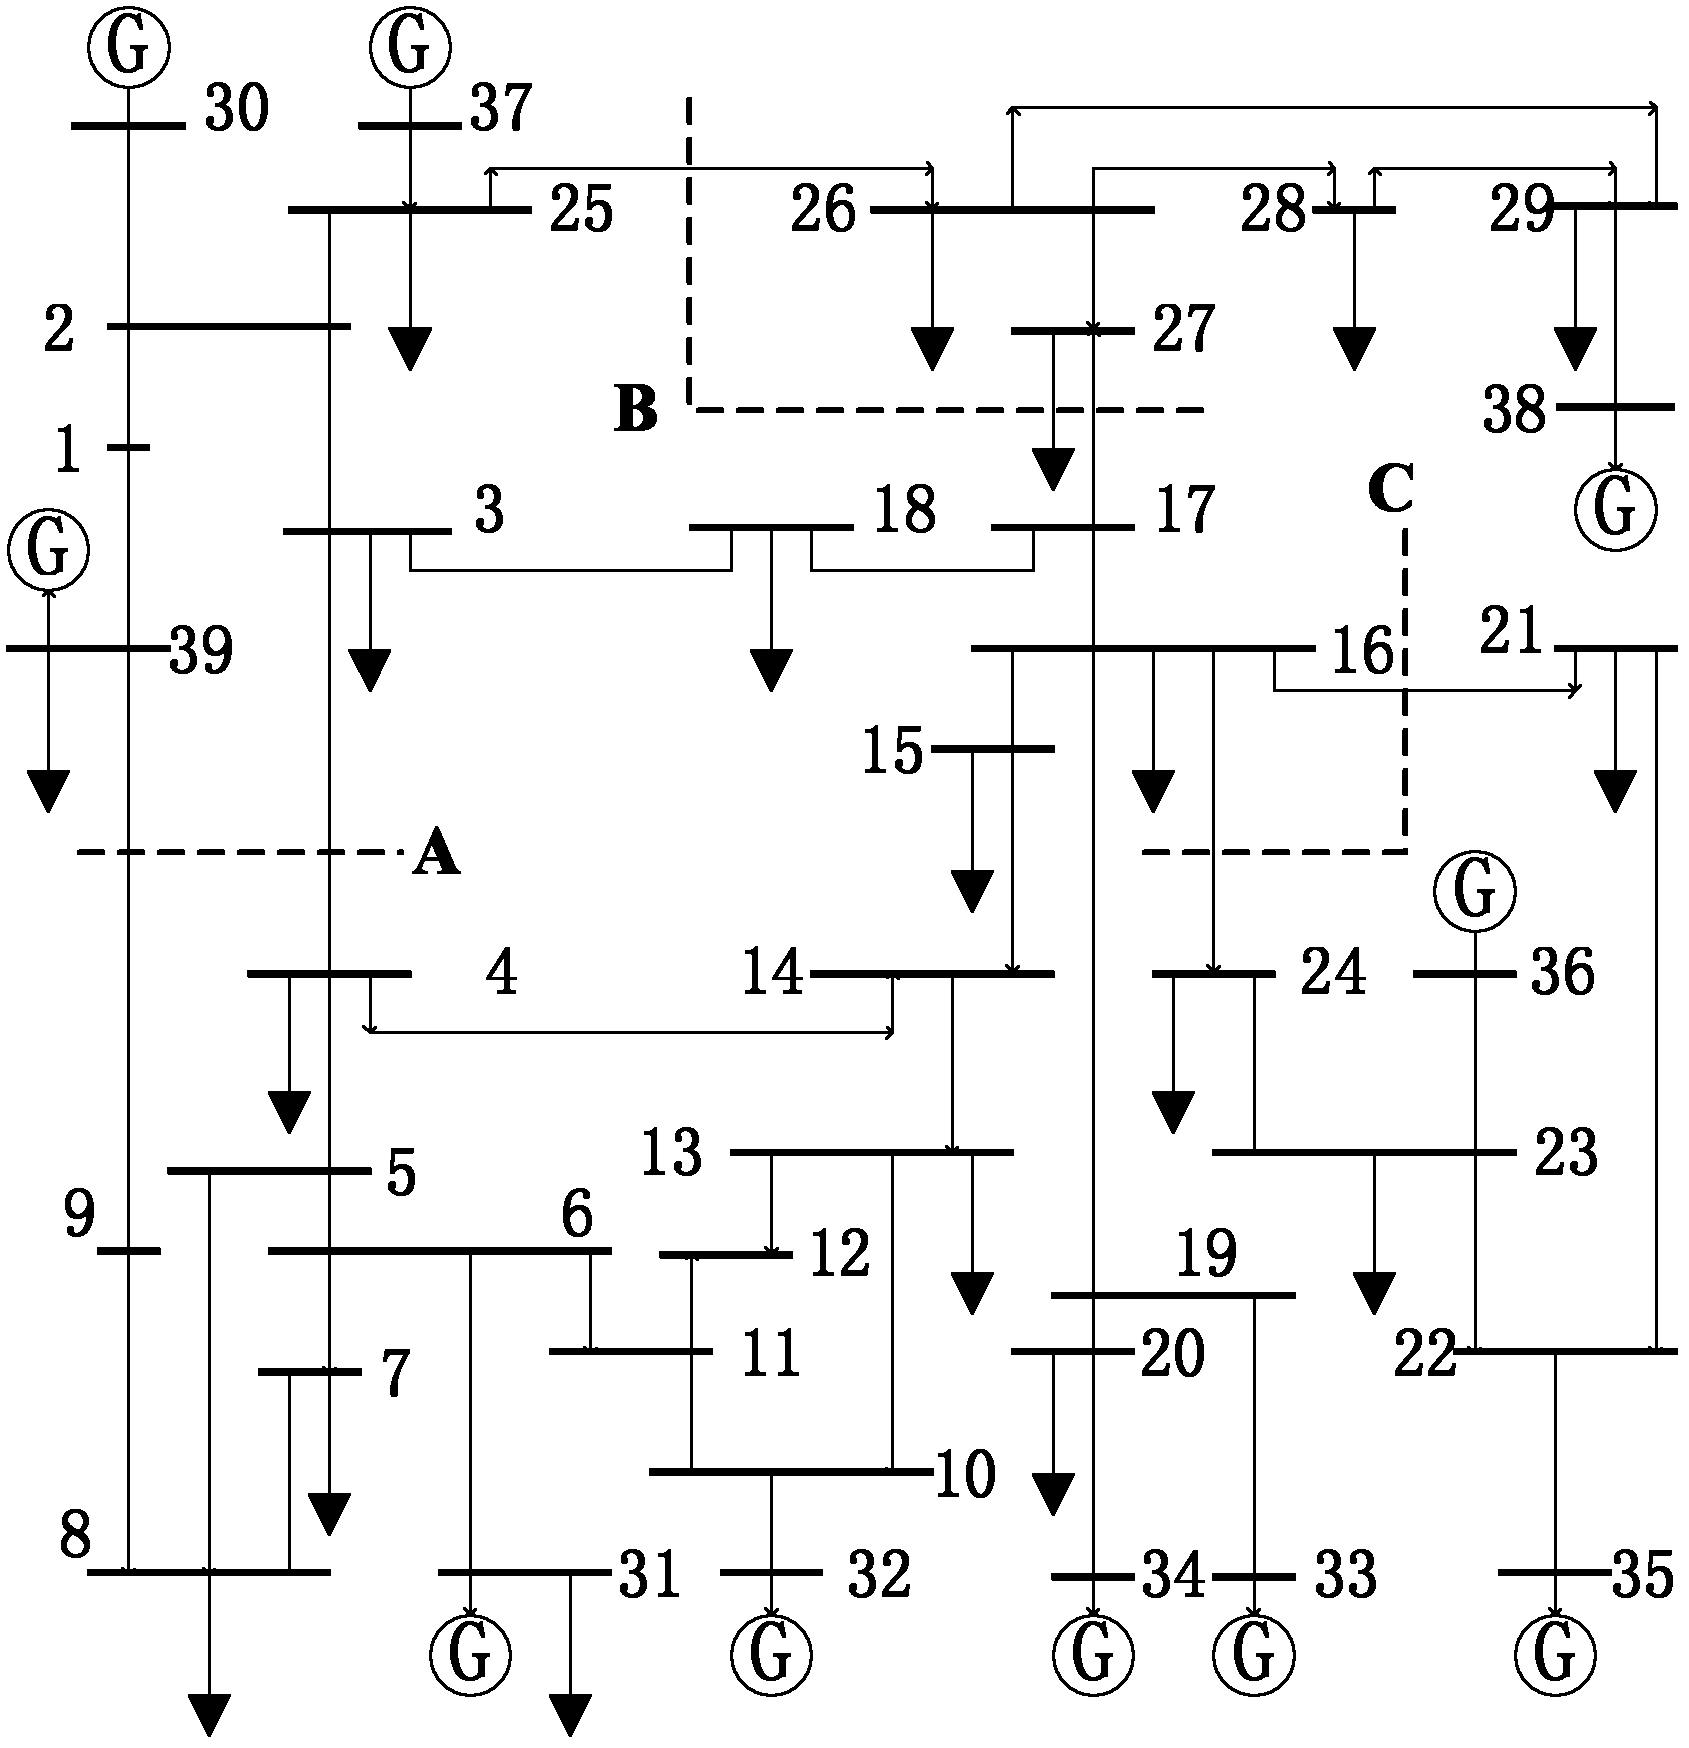 Automatic generating method for day-ahead plan power flow in power grid